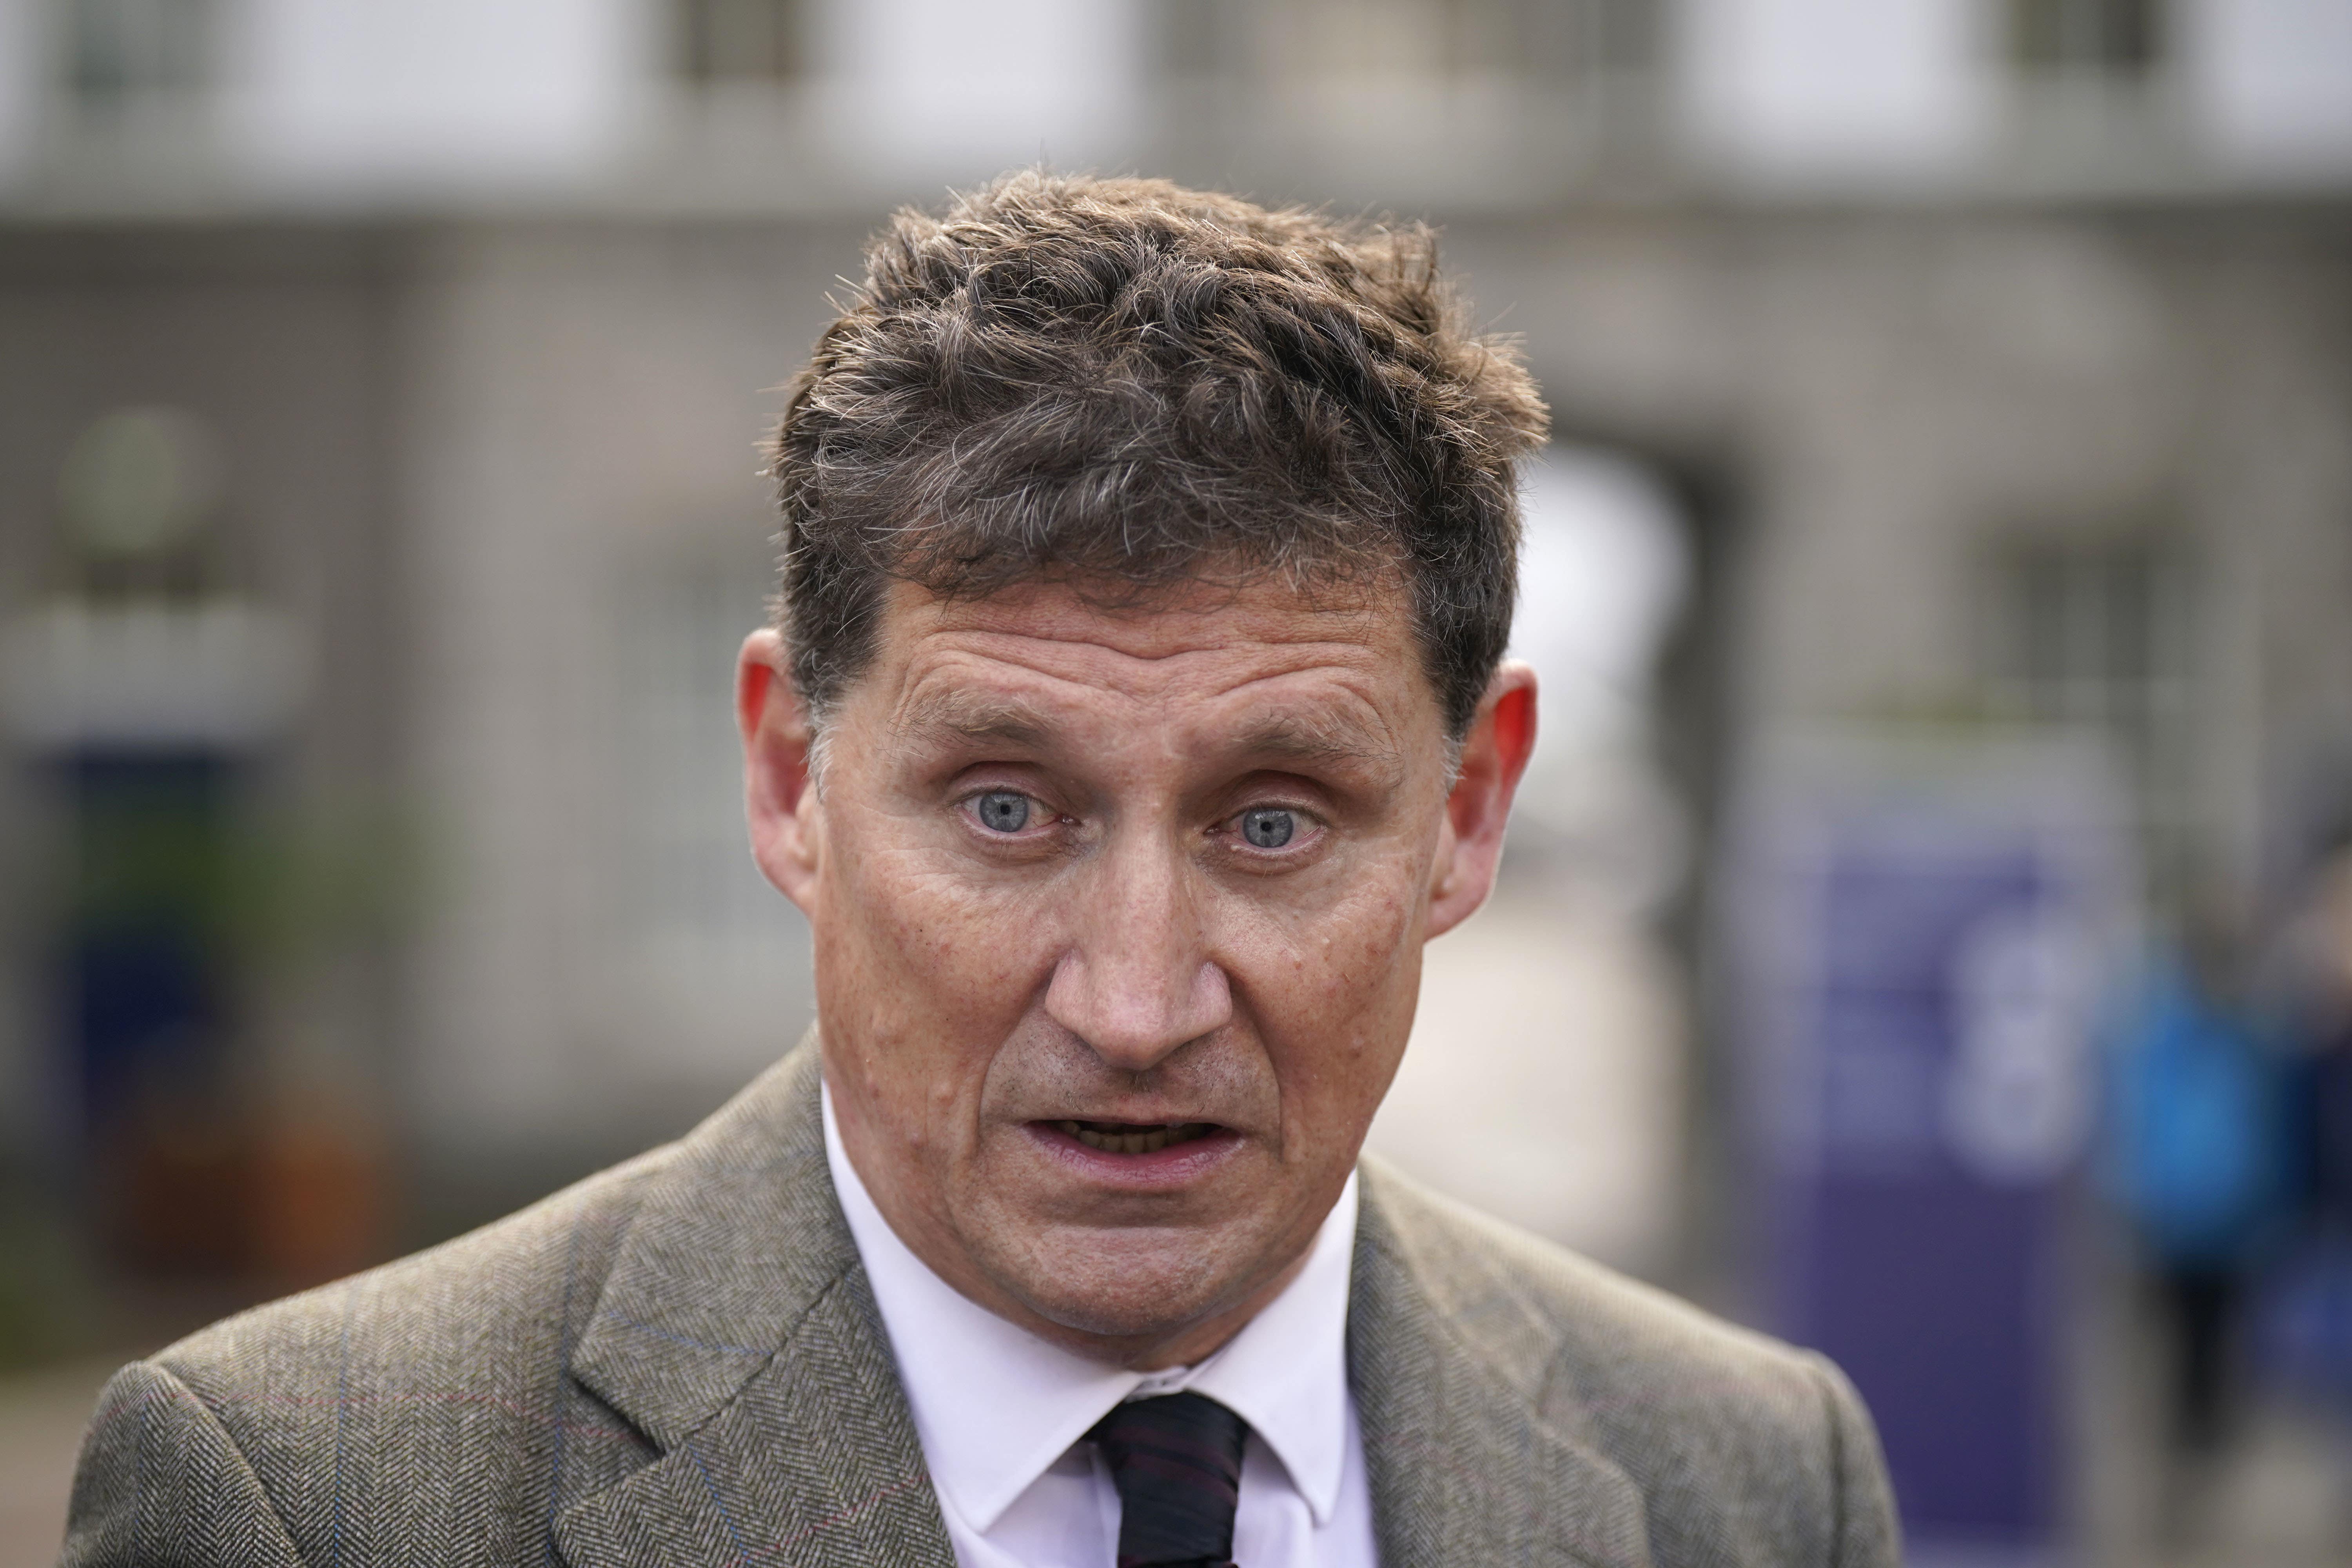 Irish transport minister Eamon Ryan has said the deal struck at the Cop28 climate conference to ‘transition away’ from fossil fuels is ‘historic’ (Niall Carson/PA)